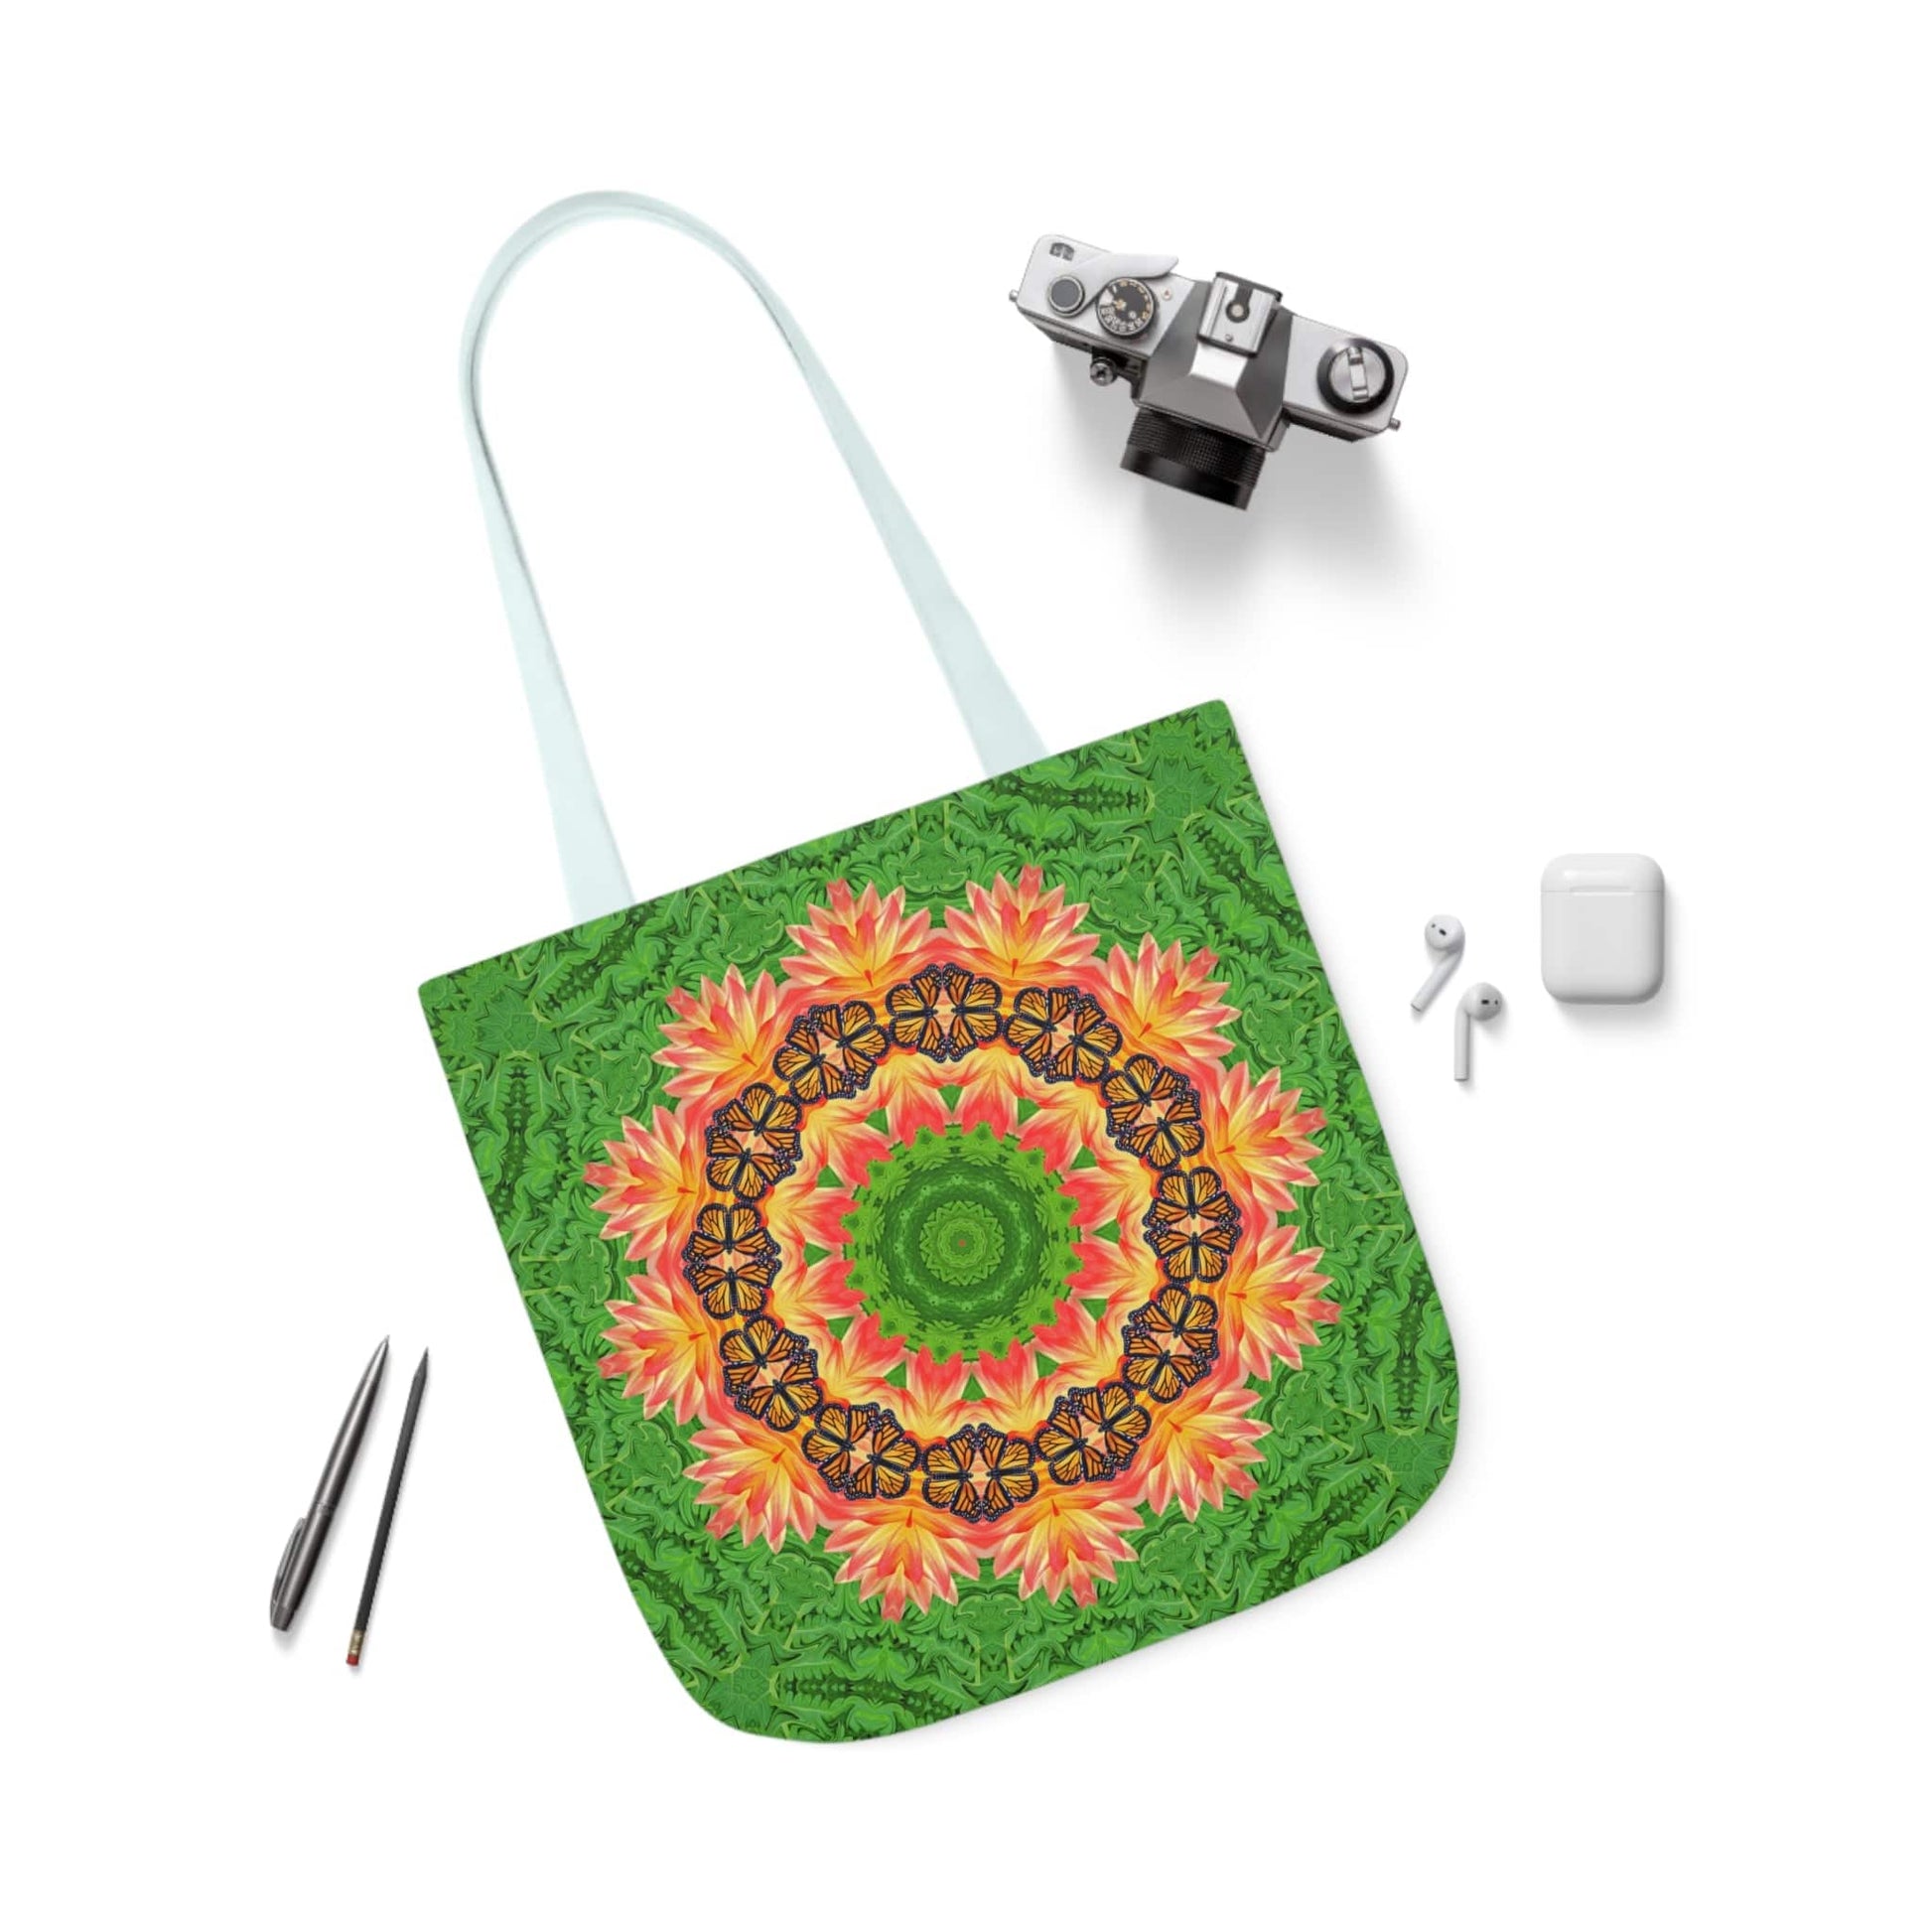 Monarch Butterfly Floral Mandala Tote Bag - Cute and Practical Everyday Accessory light blue handle